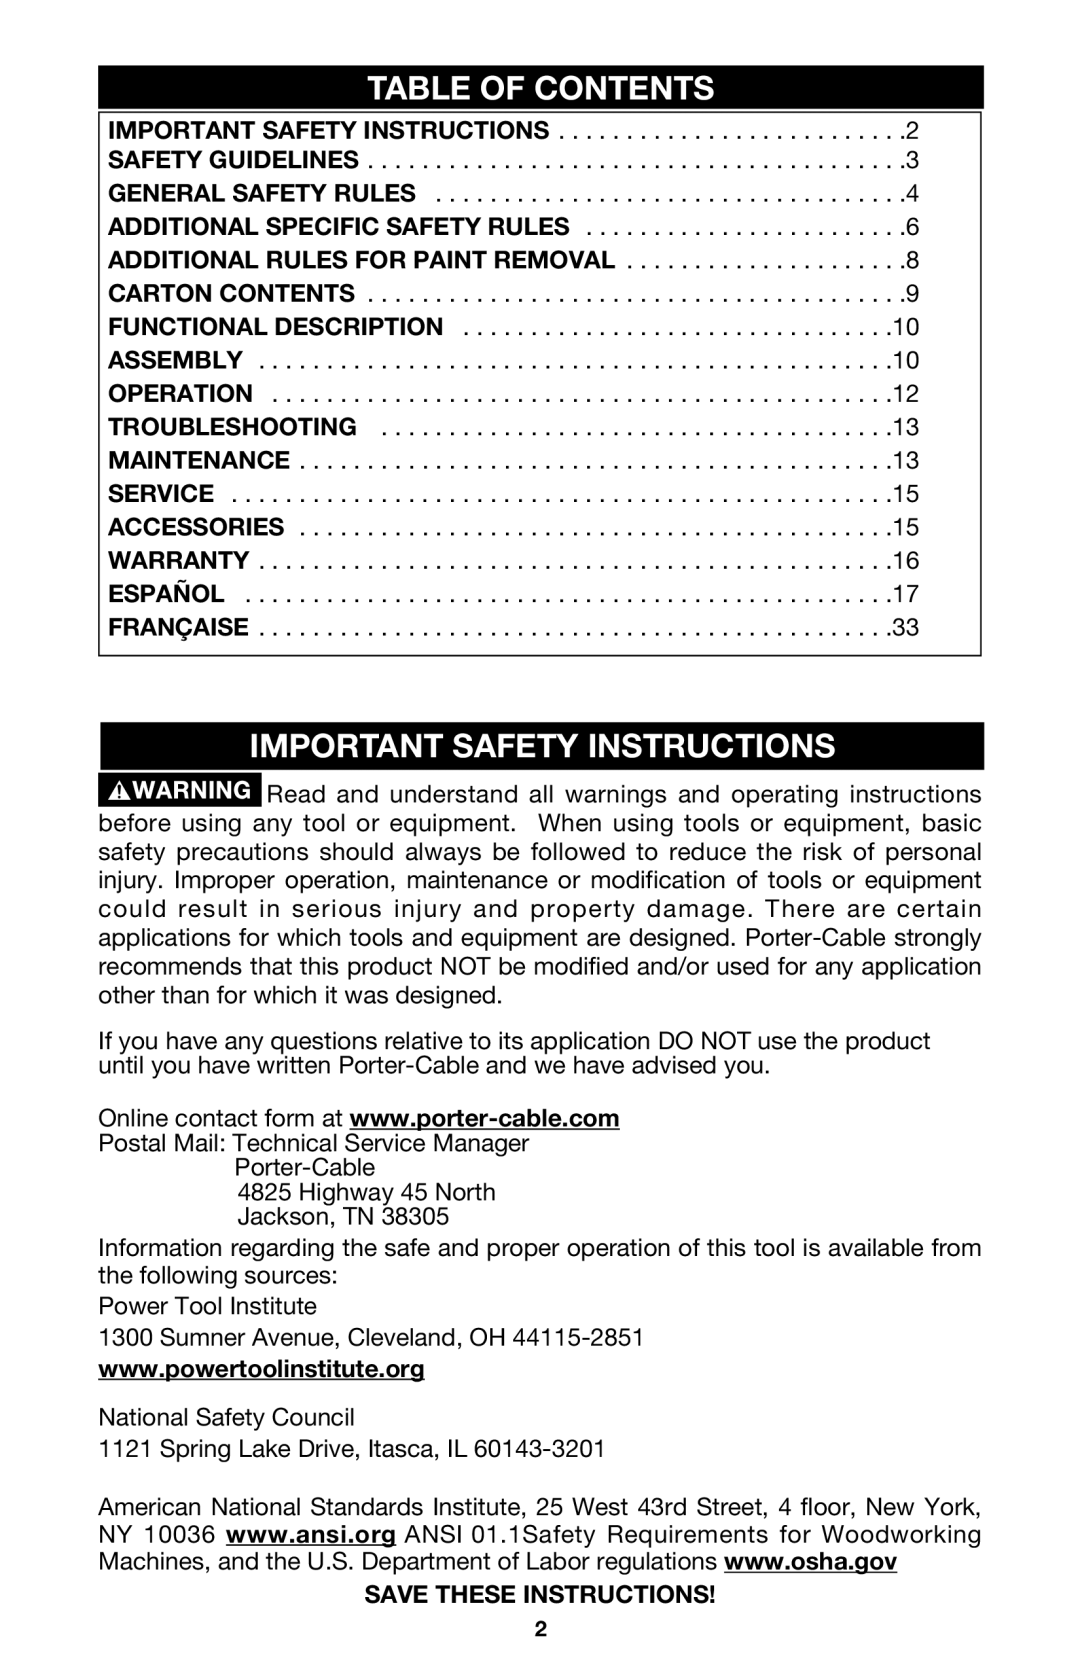 Porter-Cable 333VS instruction manual Table Of Contents, Important Safety Instructions 